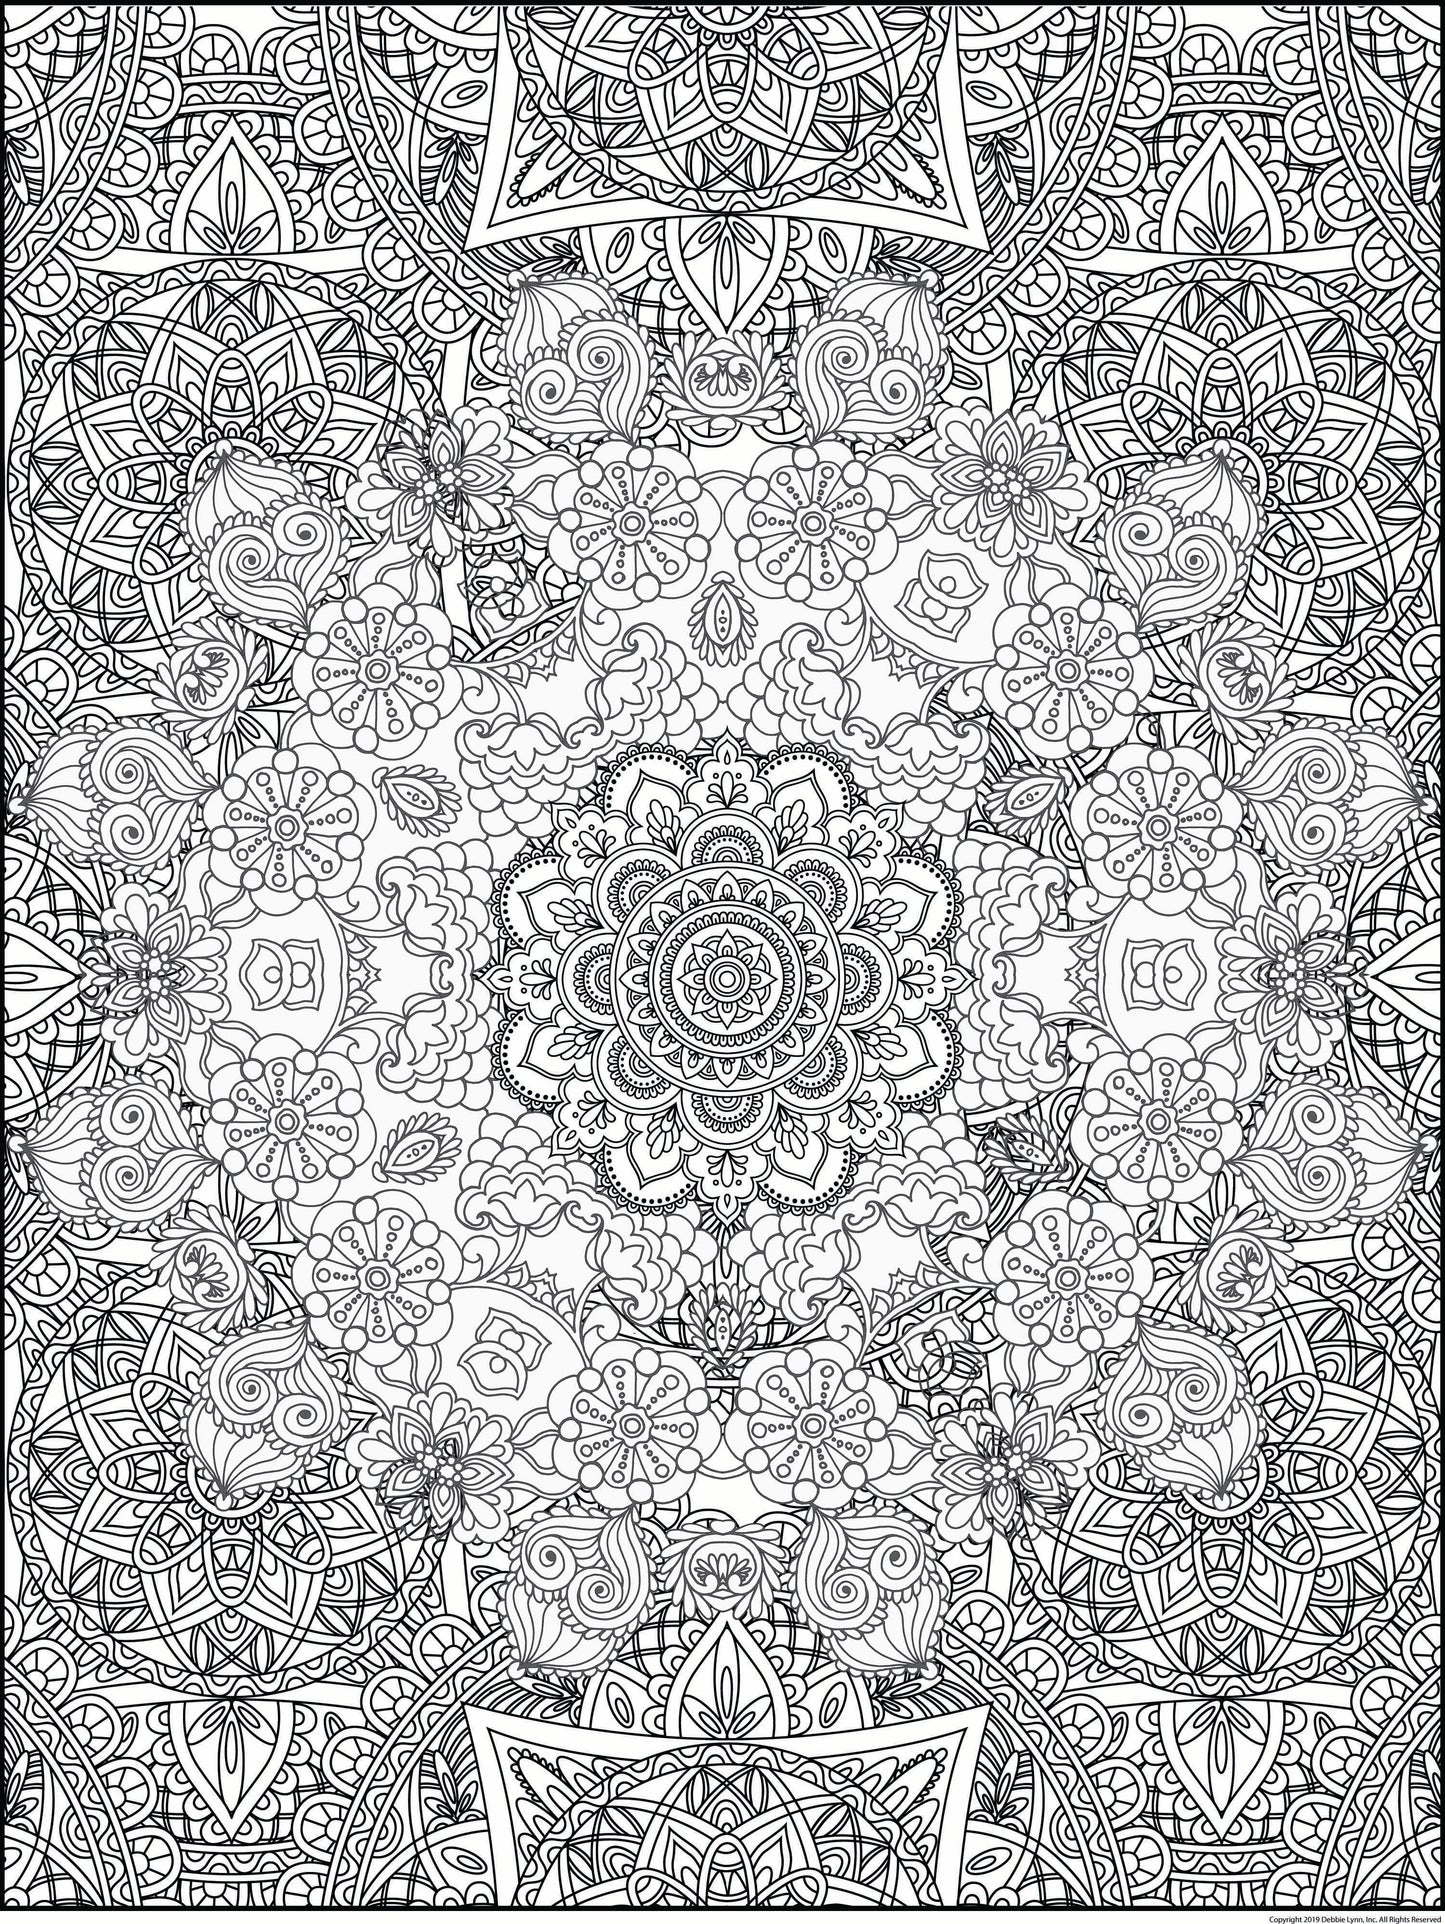 Mandala Personalized Giant Coloring Poster 46"x60"